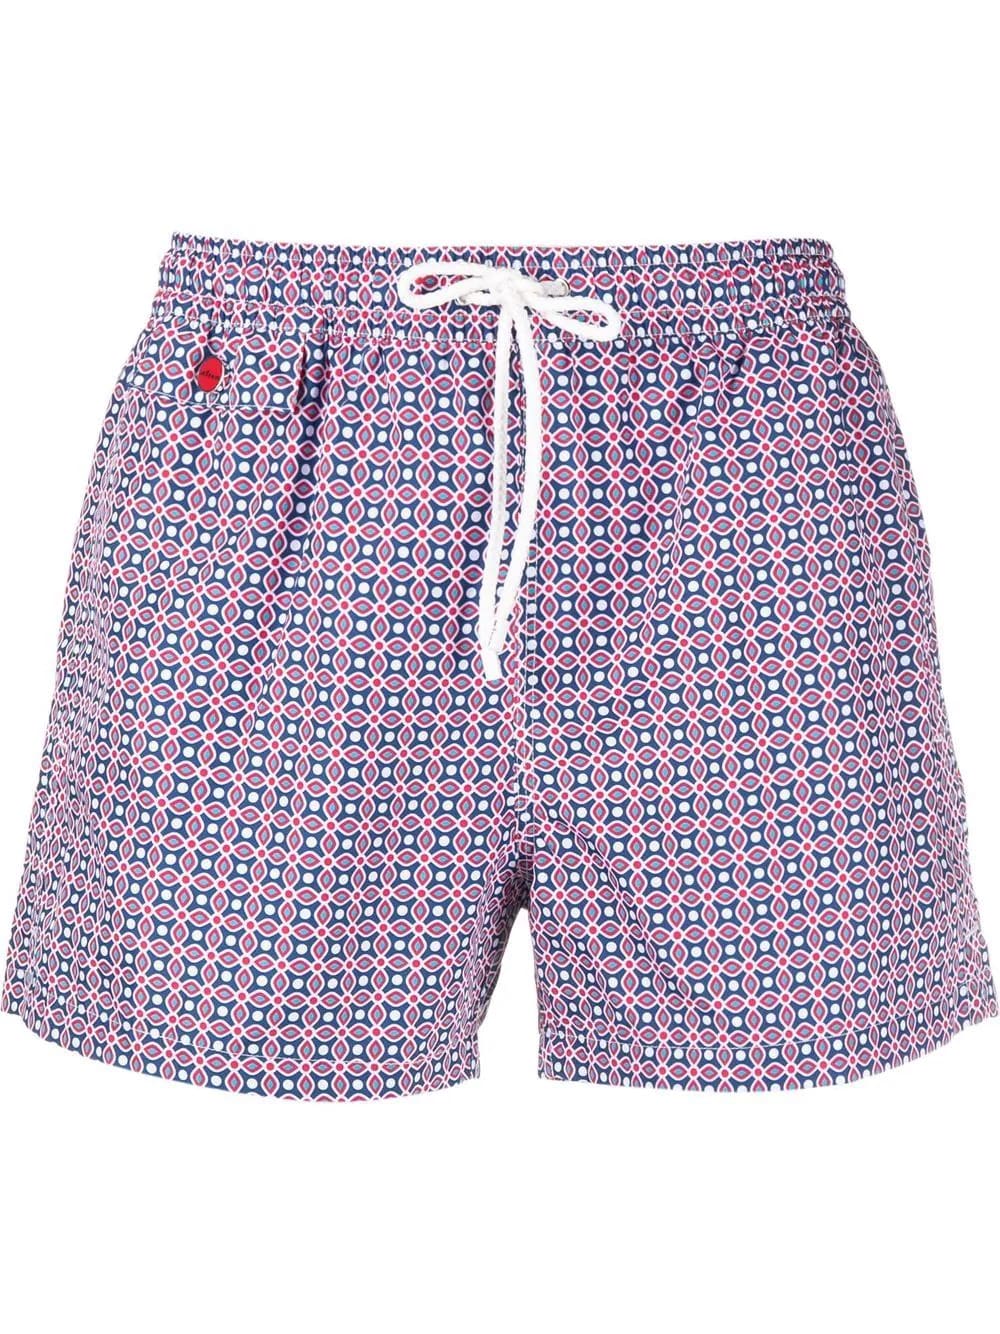 Kiton Swim Shorts With Blue, White And Red Geometric Micro Pattern